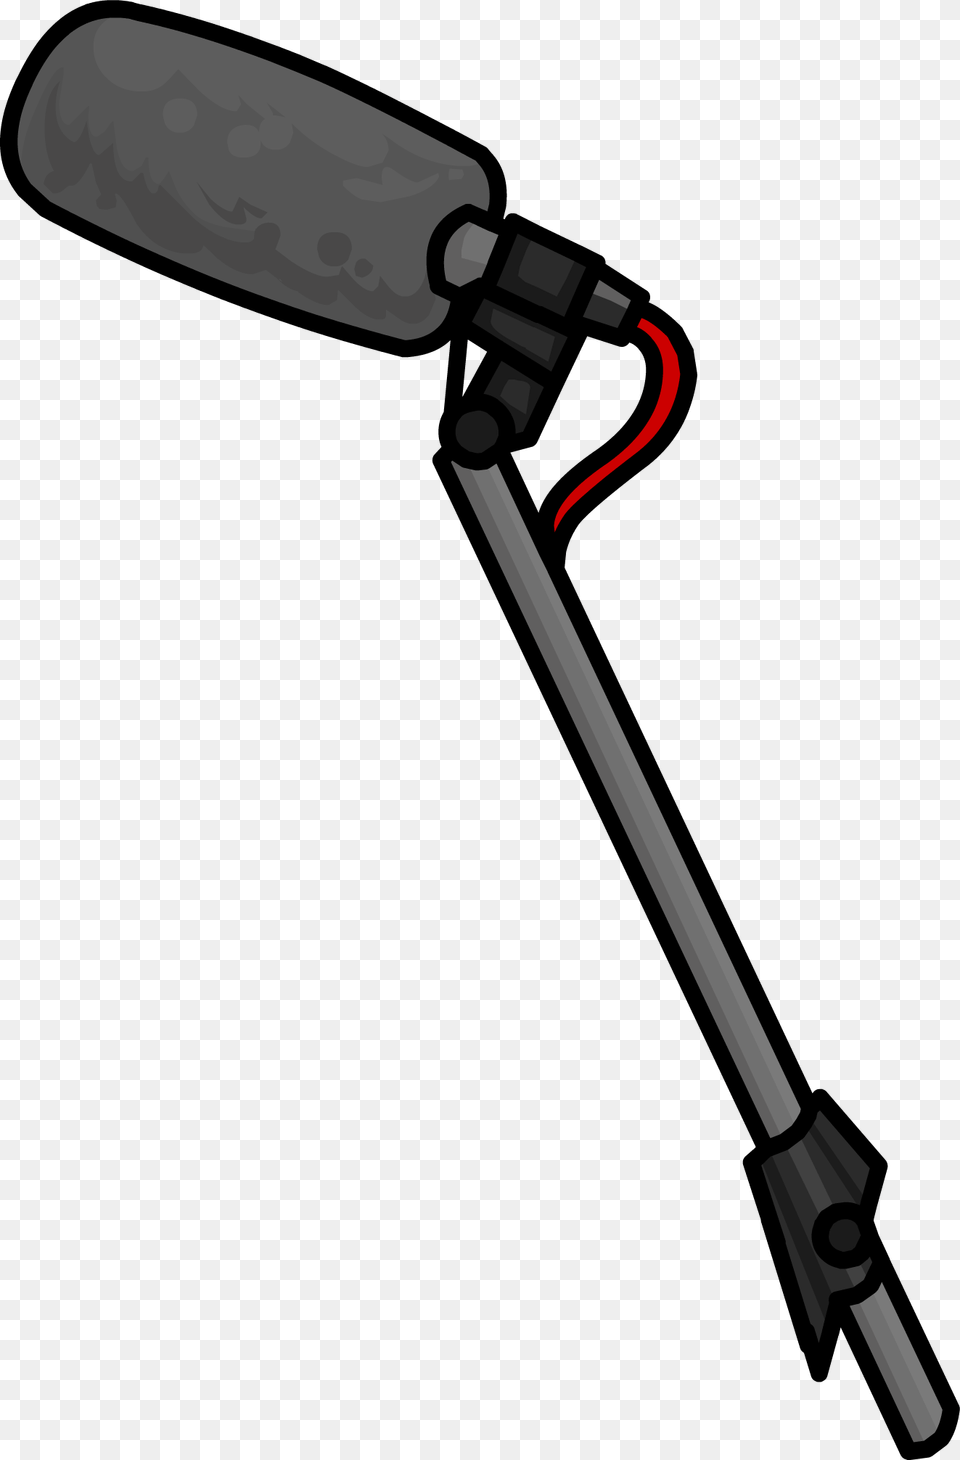 Shared Housing Home Colife Vertical, Electrical Device, Microphone, Blade, Dagger Png Image